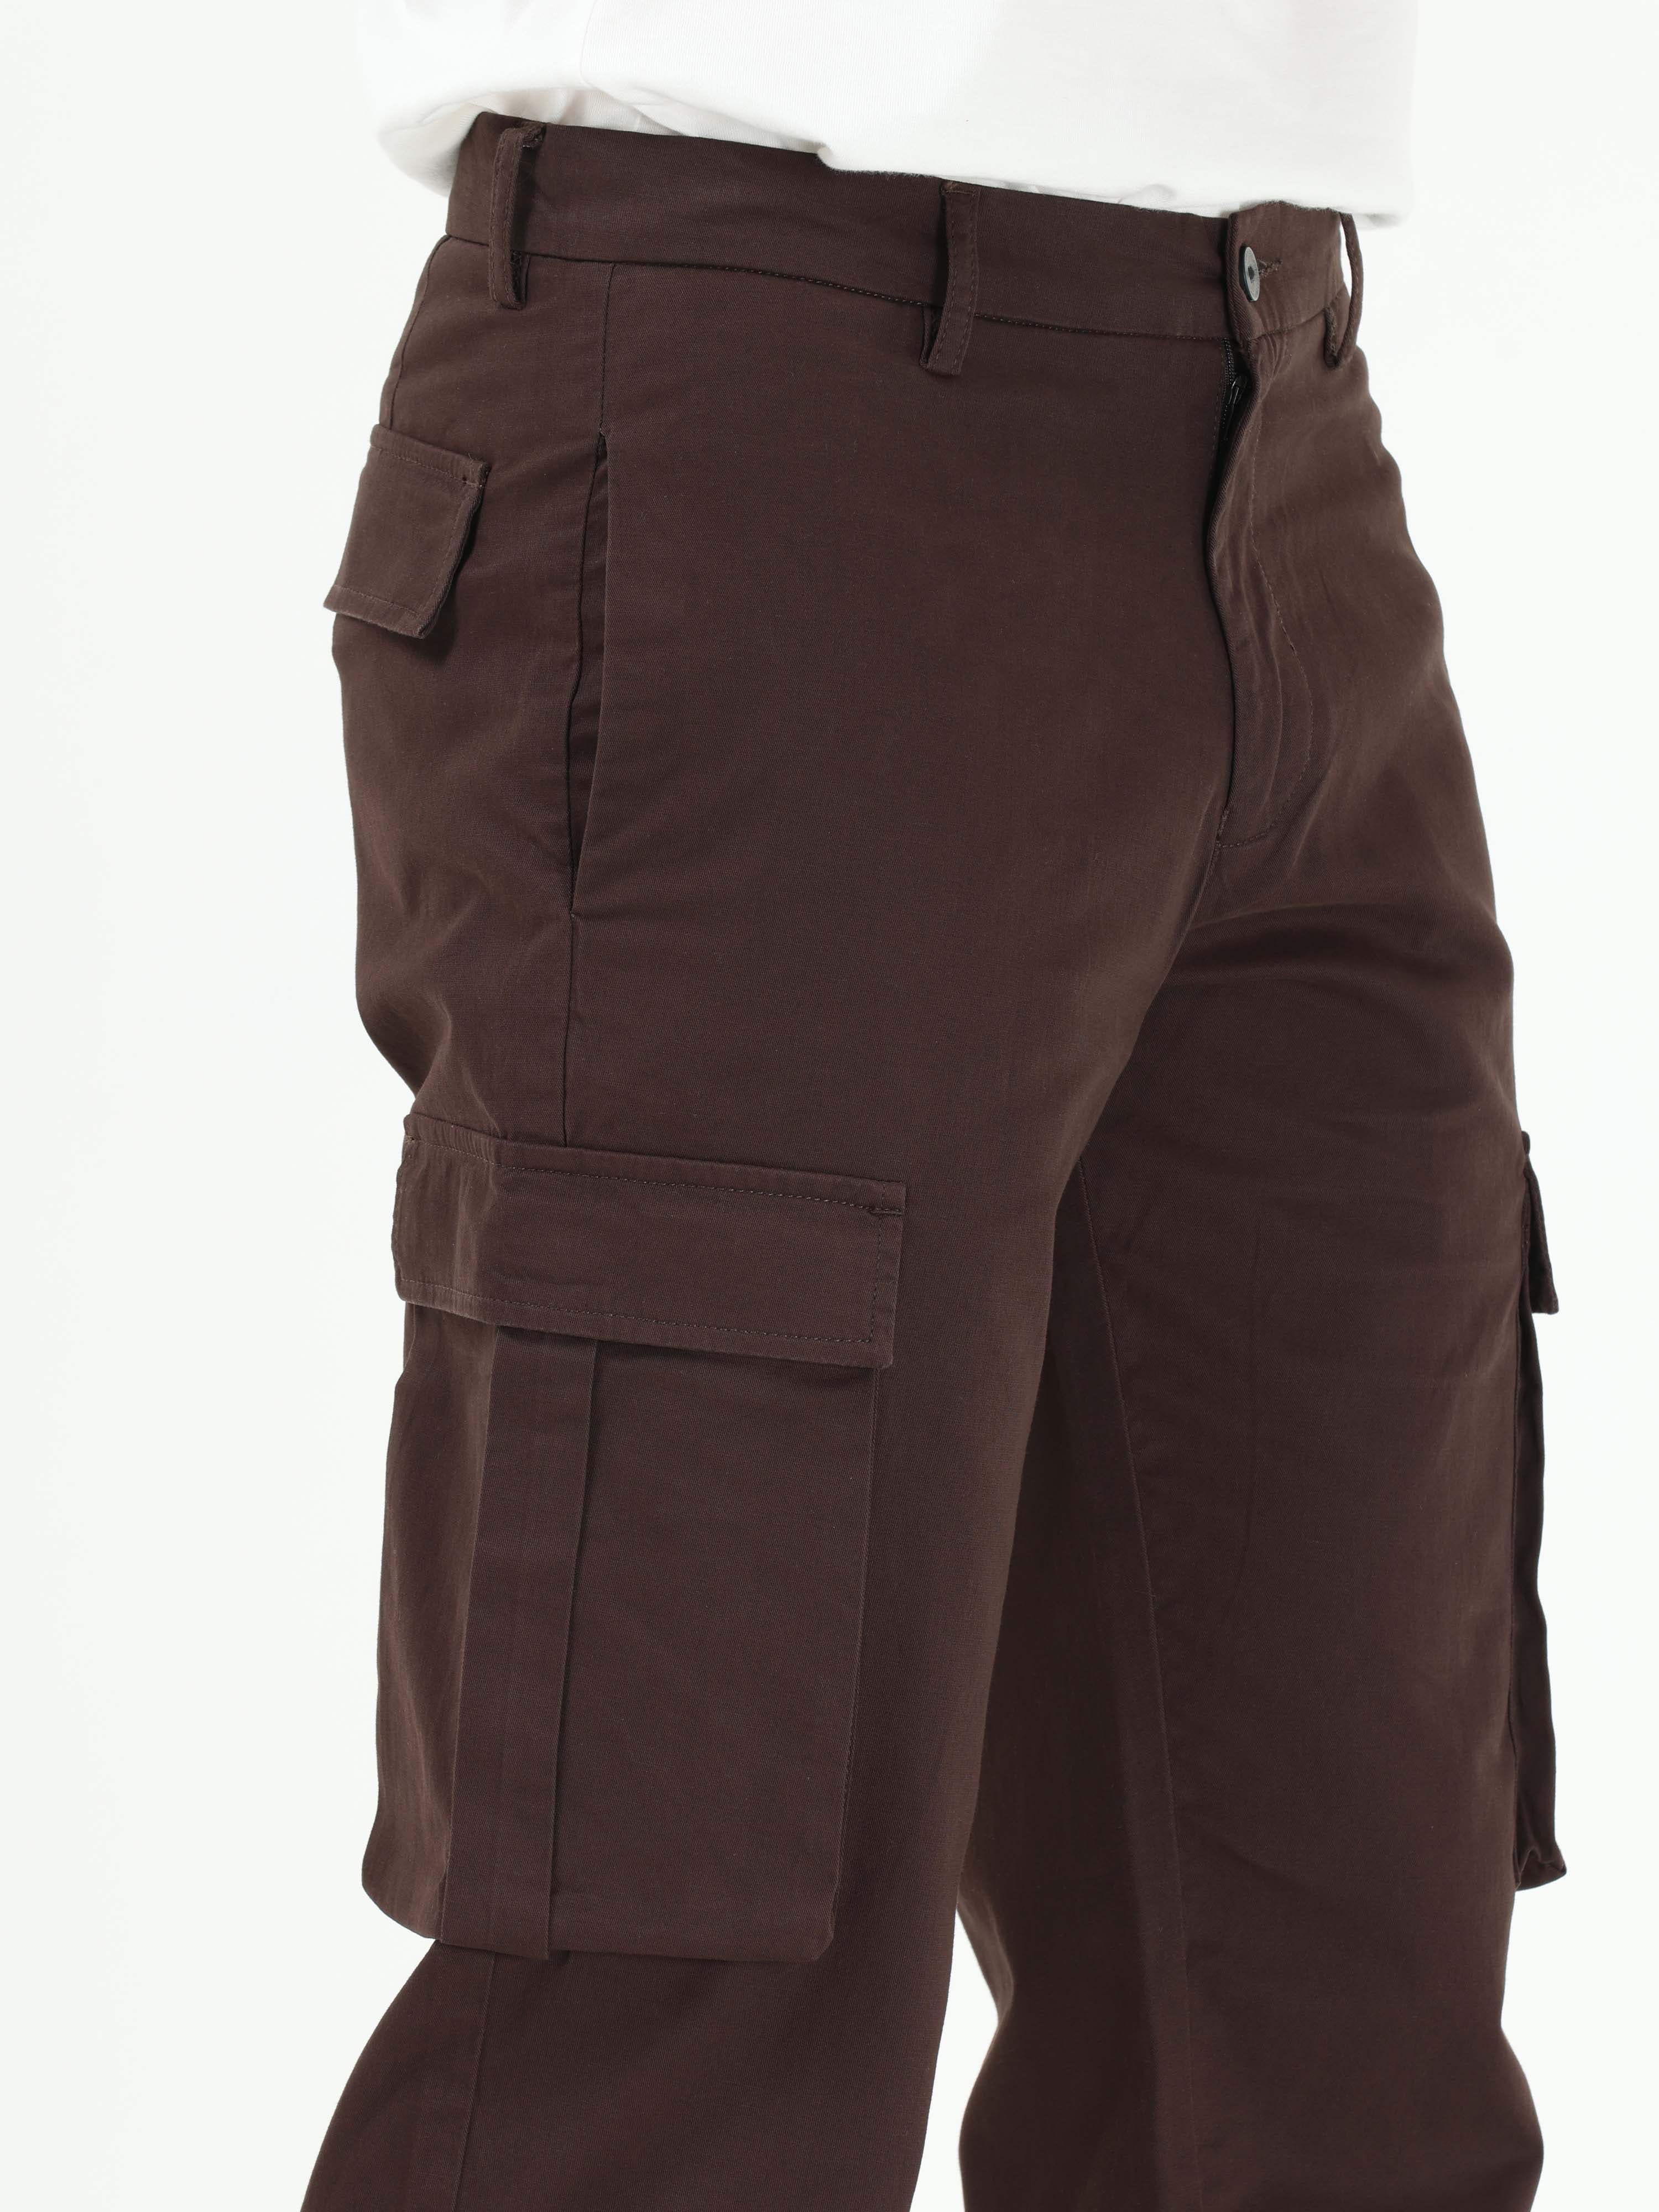 Finest Twill Brown Baggy Fit Cargo